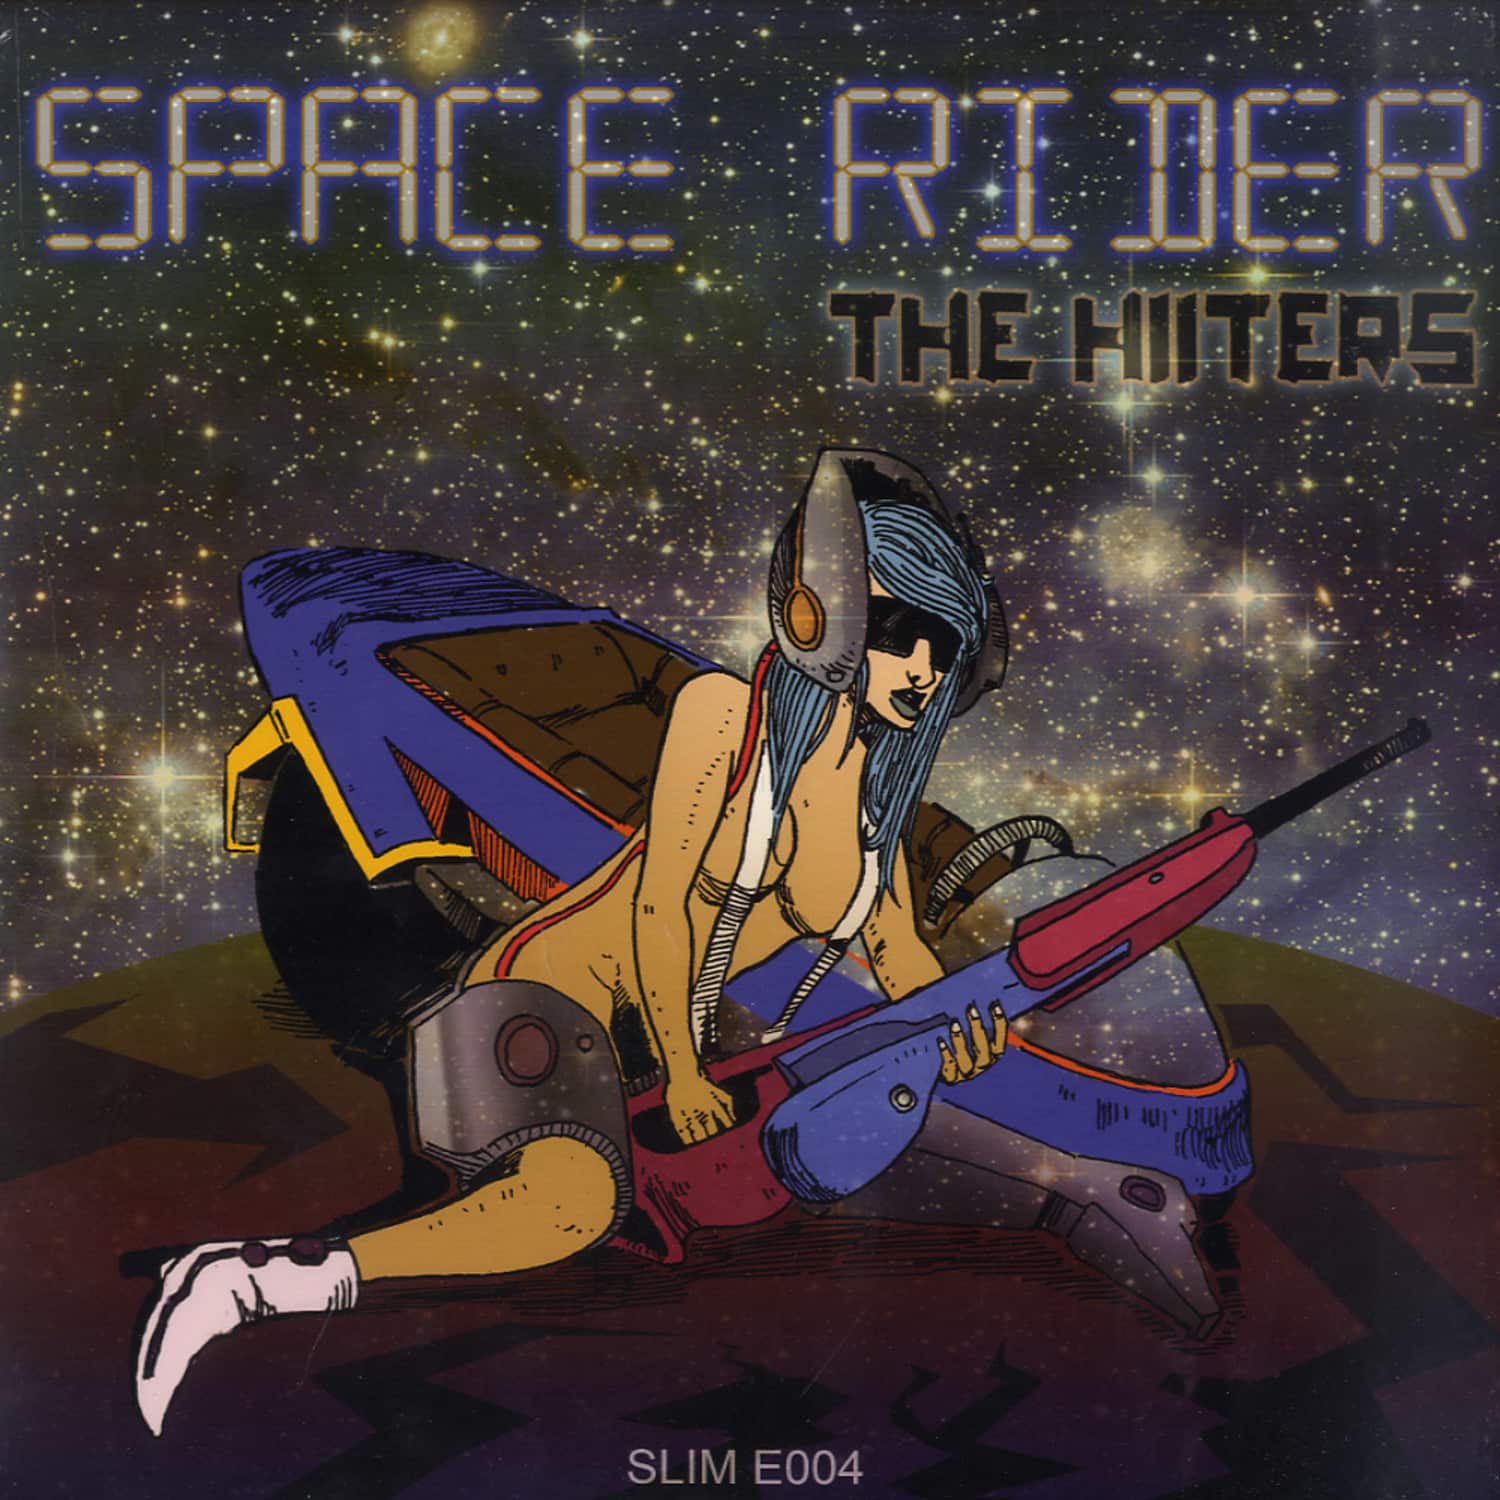 The Hiiters - SPACE RIDER